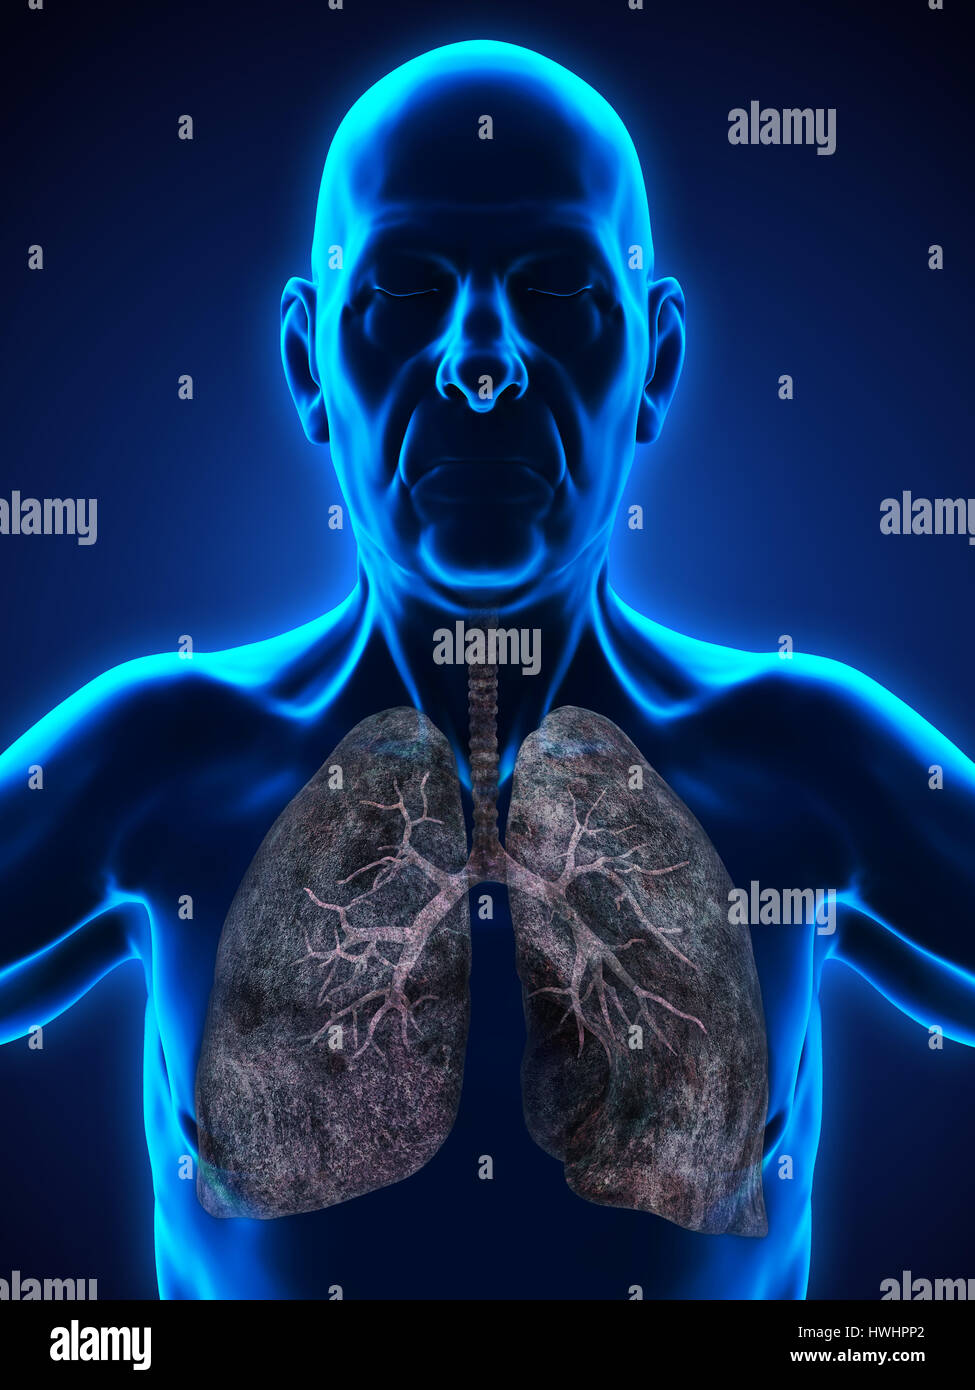 Elderly Male with Lung Cancer Illustration Stock Photo